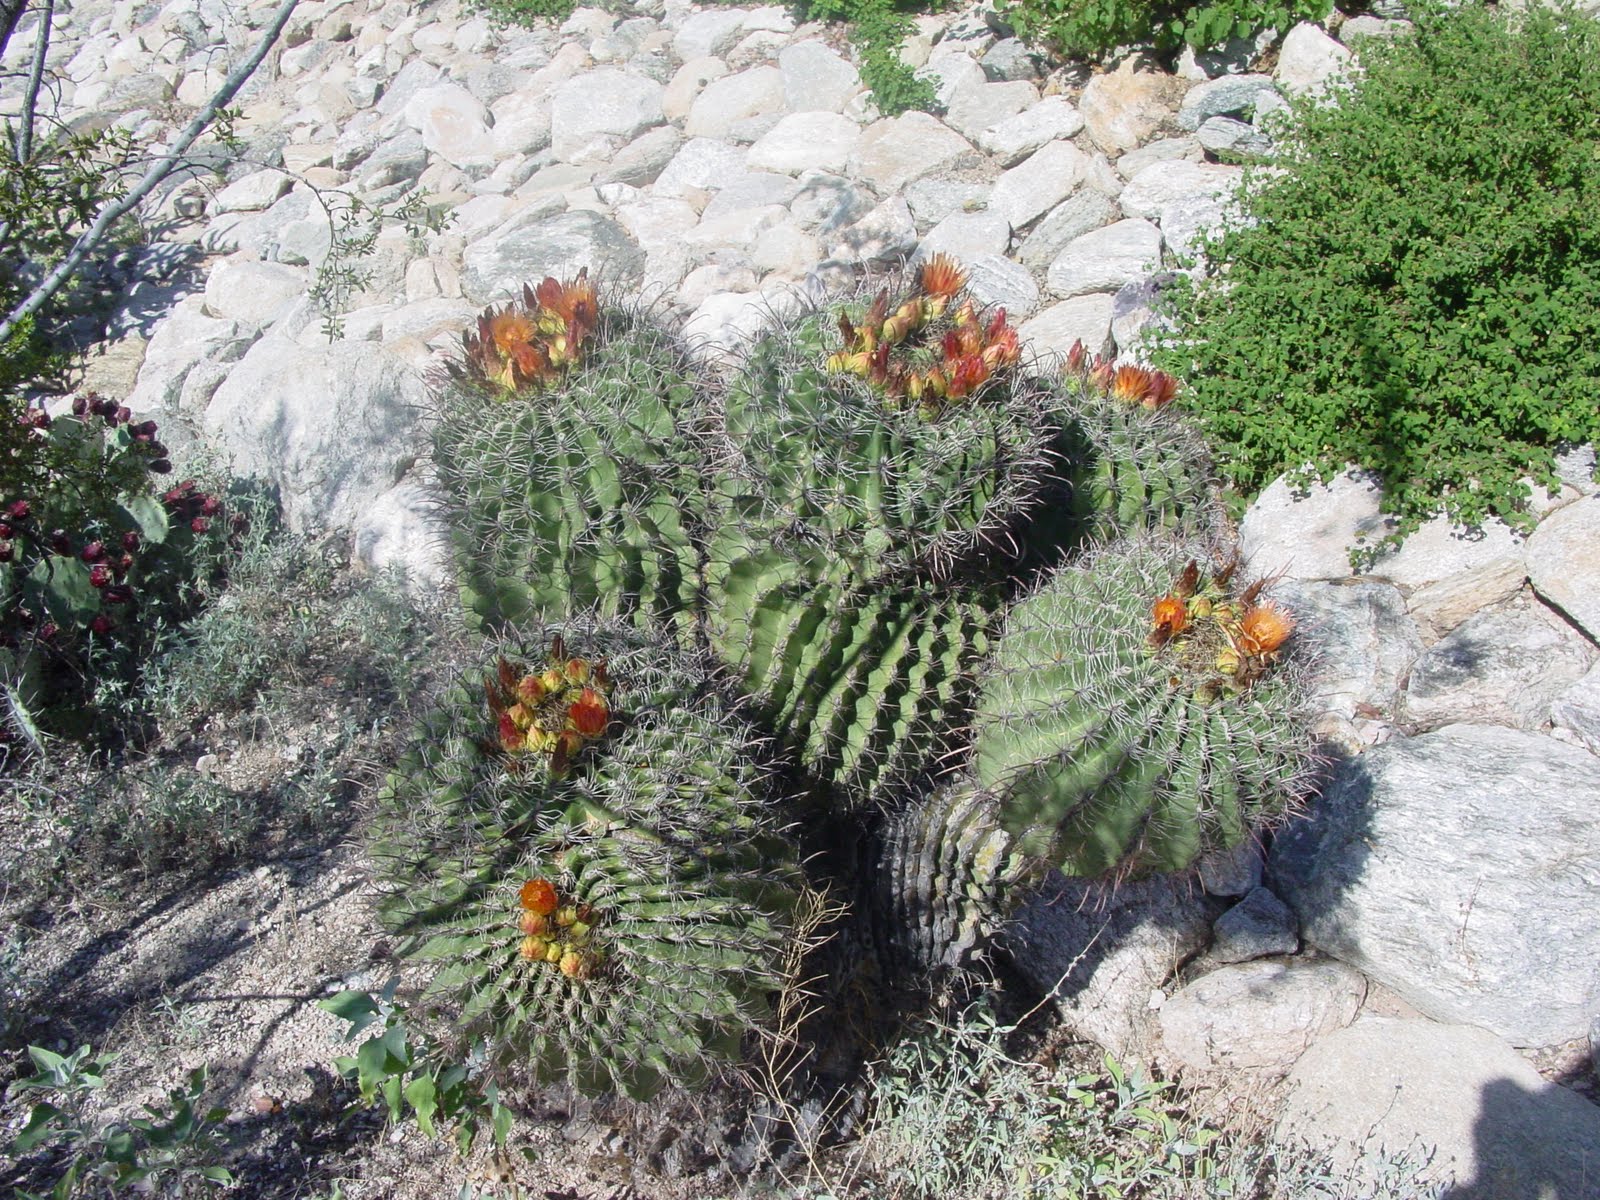 Tucson Daily Happenings: "The Barrel Cactus commonly ...